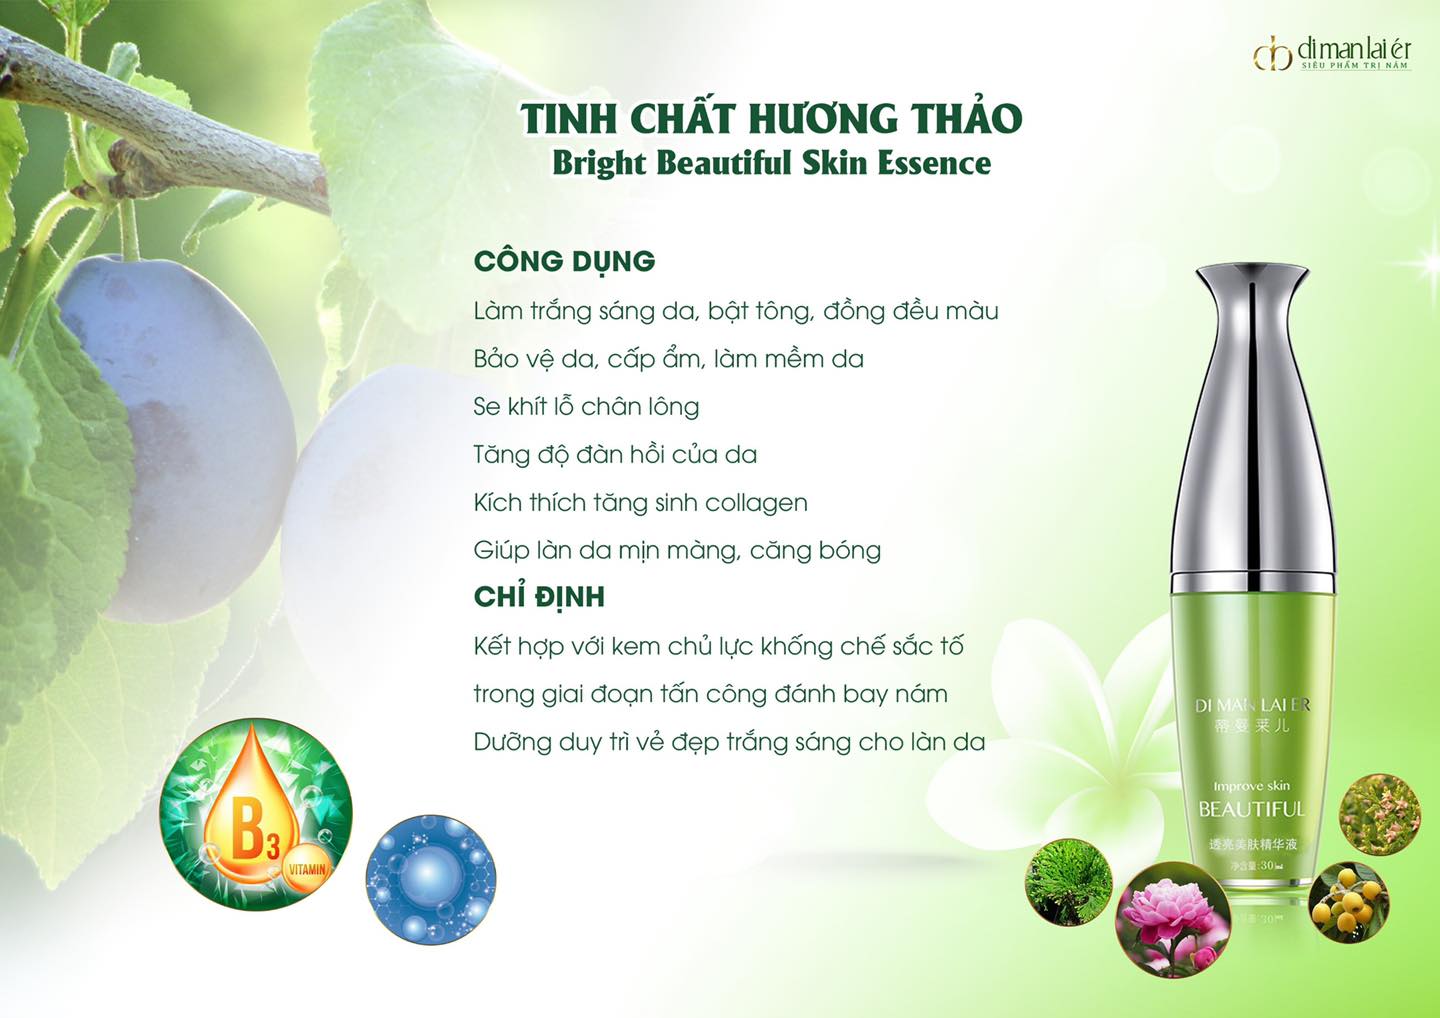 TINH CHAT HUONG THAO